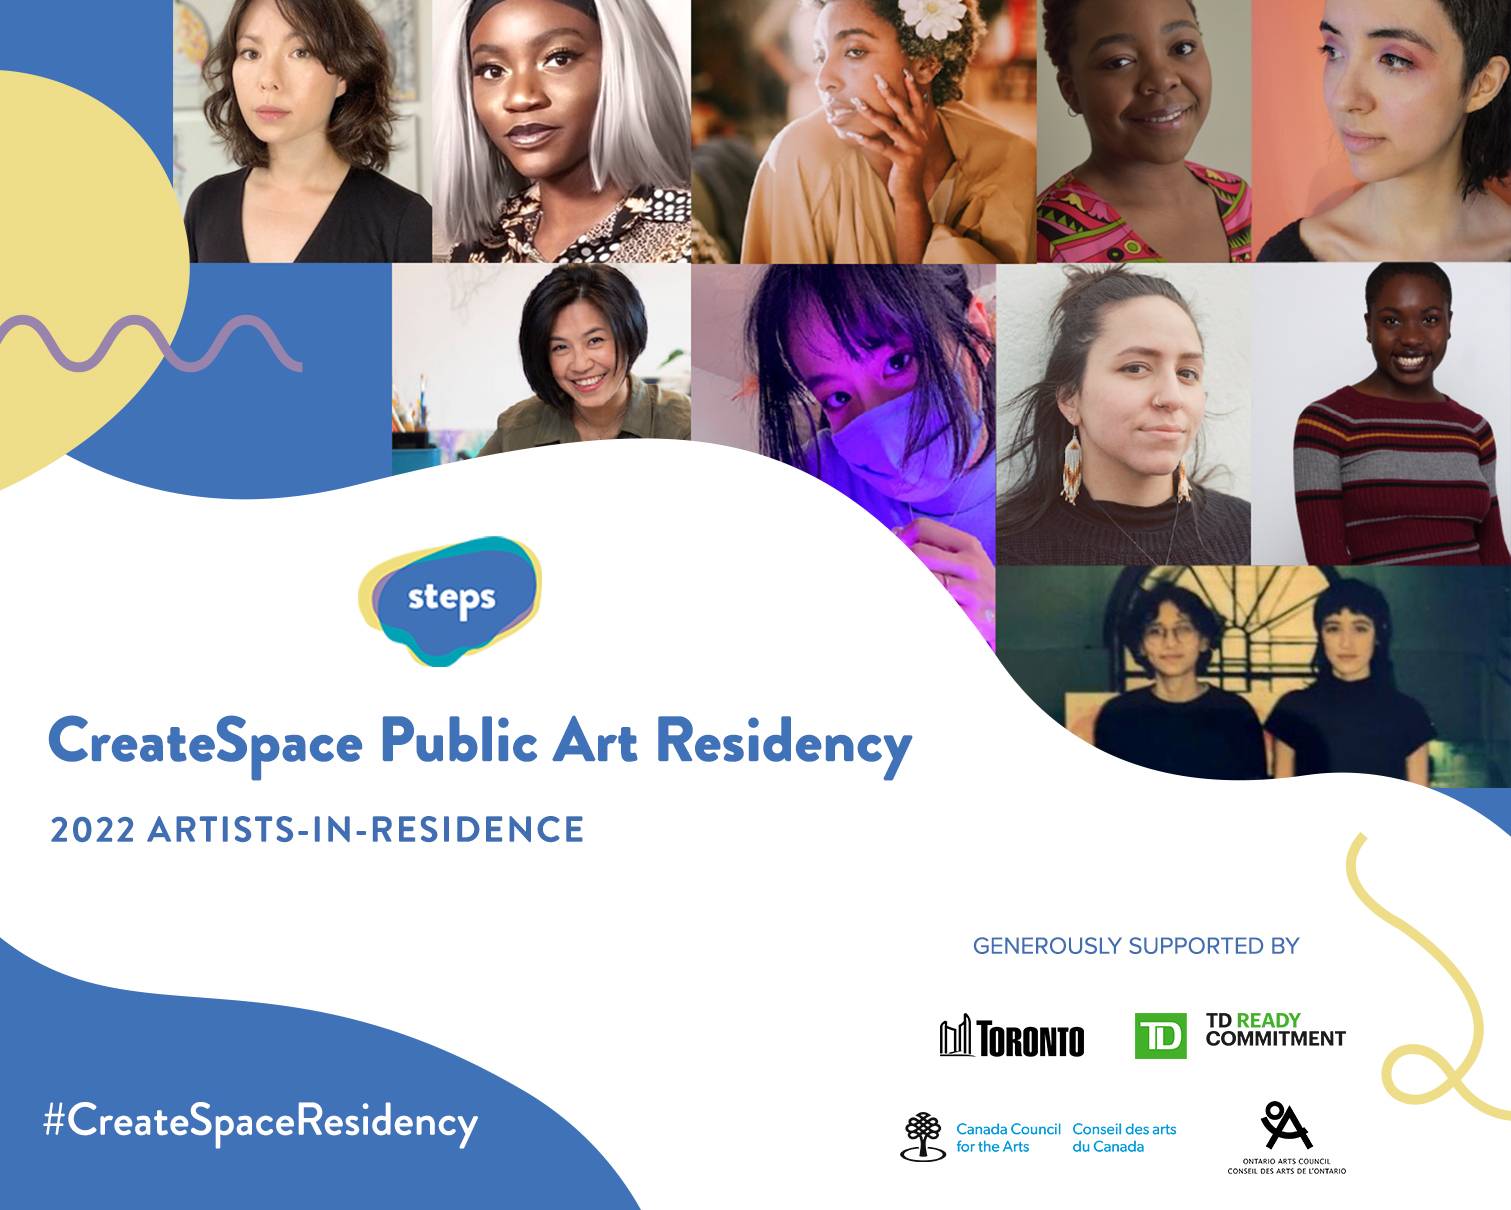 Graphic design tile that reads "CreateSpace Public Art Residency 2022 Artists-in-residence" with Blue and yellow design and artists' headshots